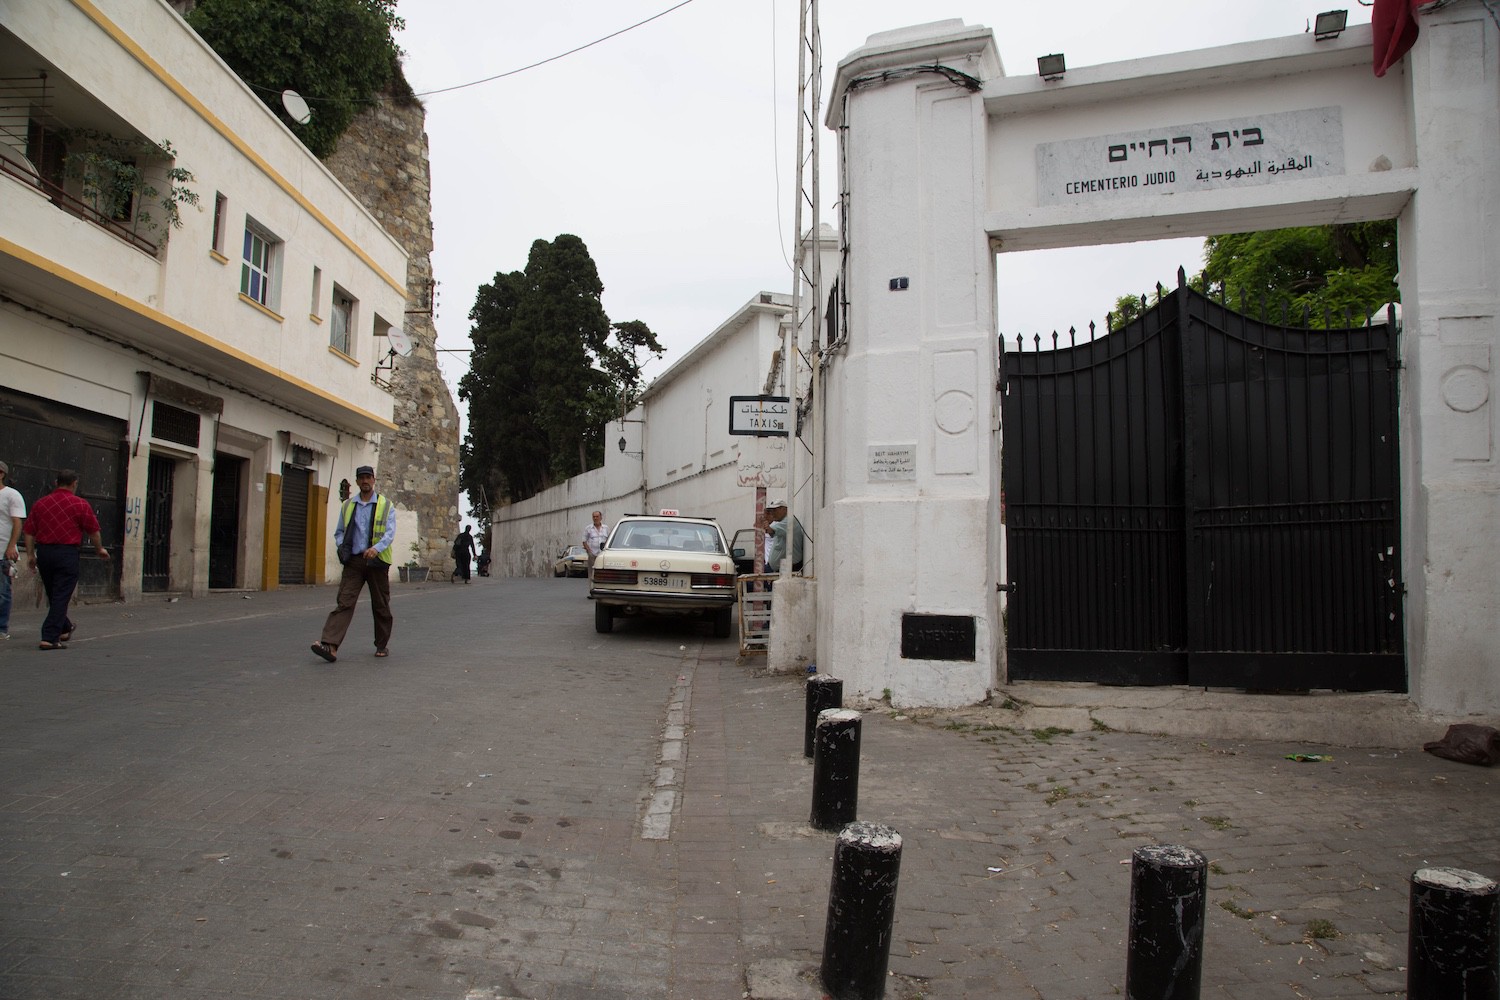 Jewish Cemetery of Tangier - View of the entrance on rue Portugal